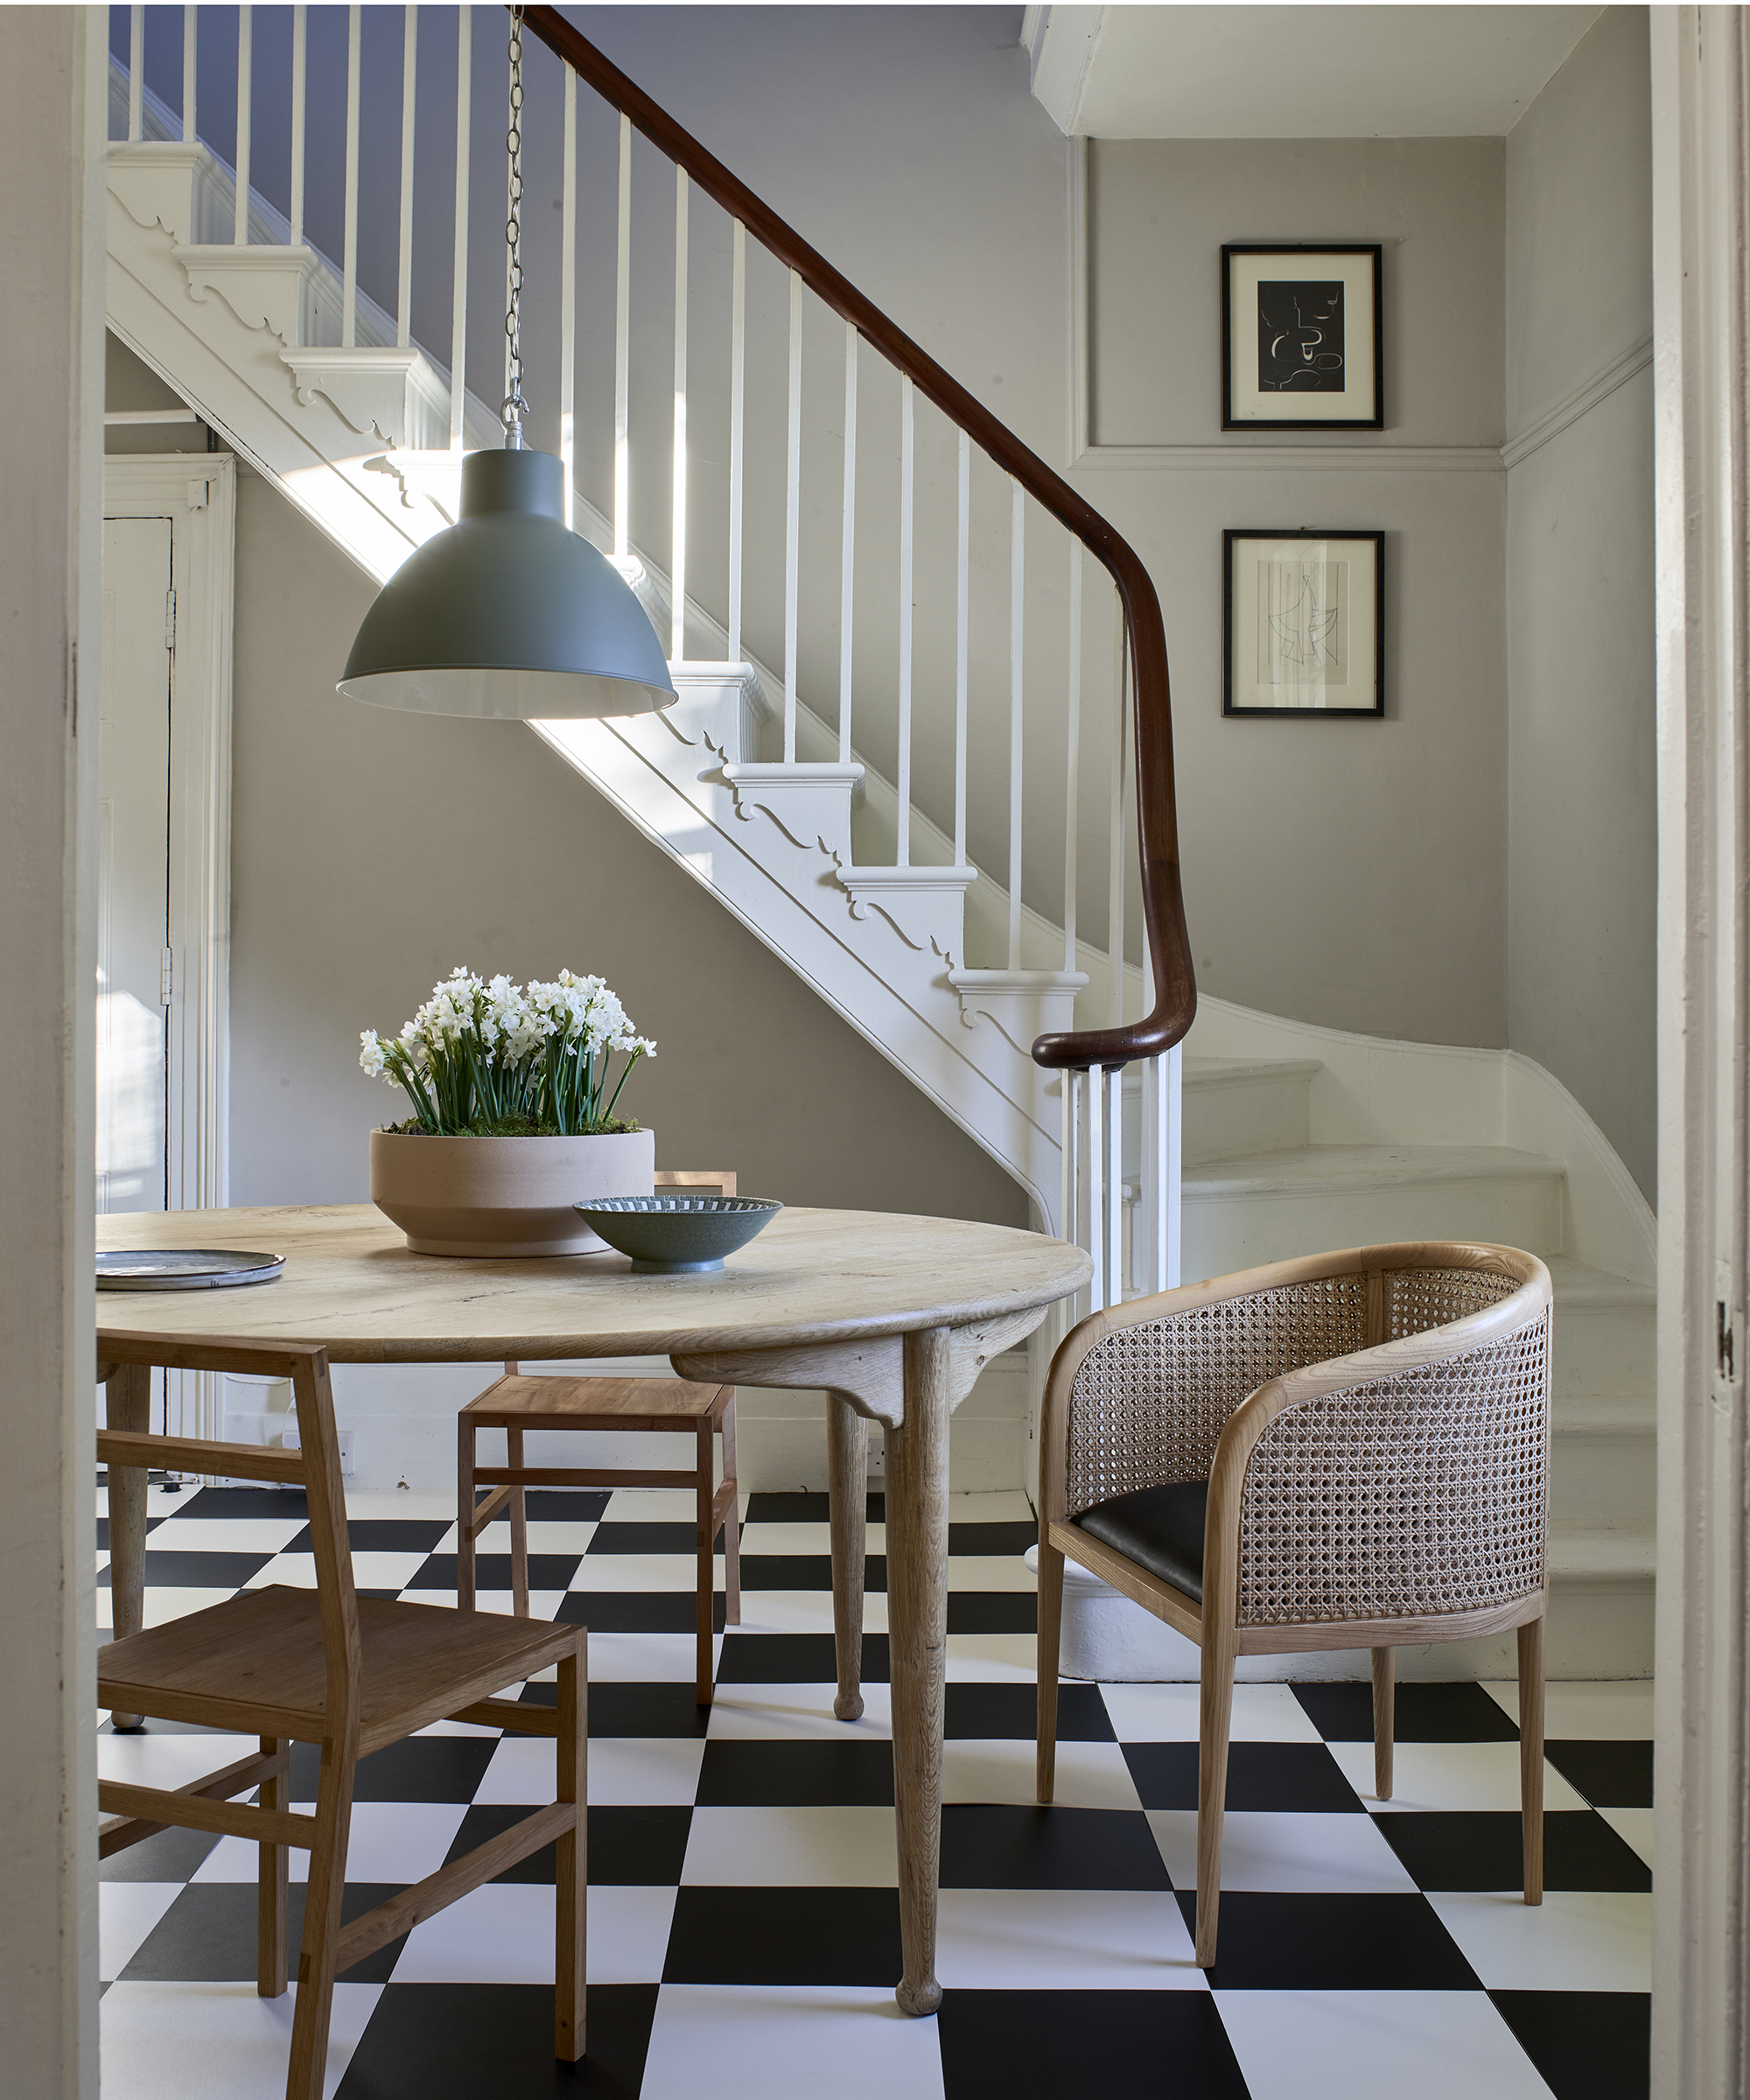 Dining room ideas - Monochrome dining scheme with checkerboard flooring